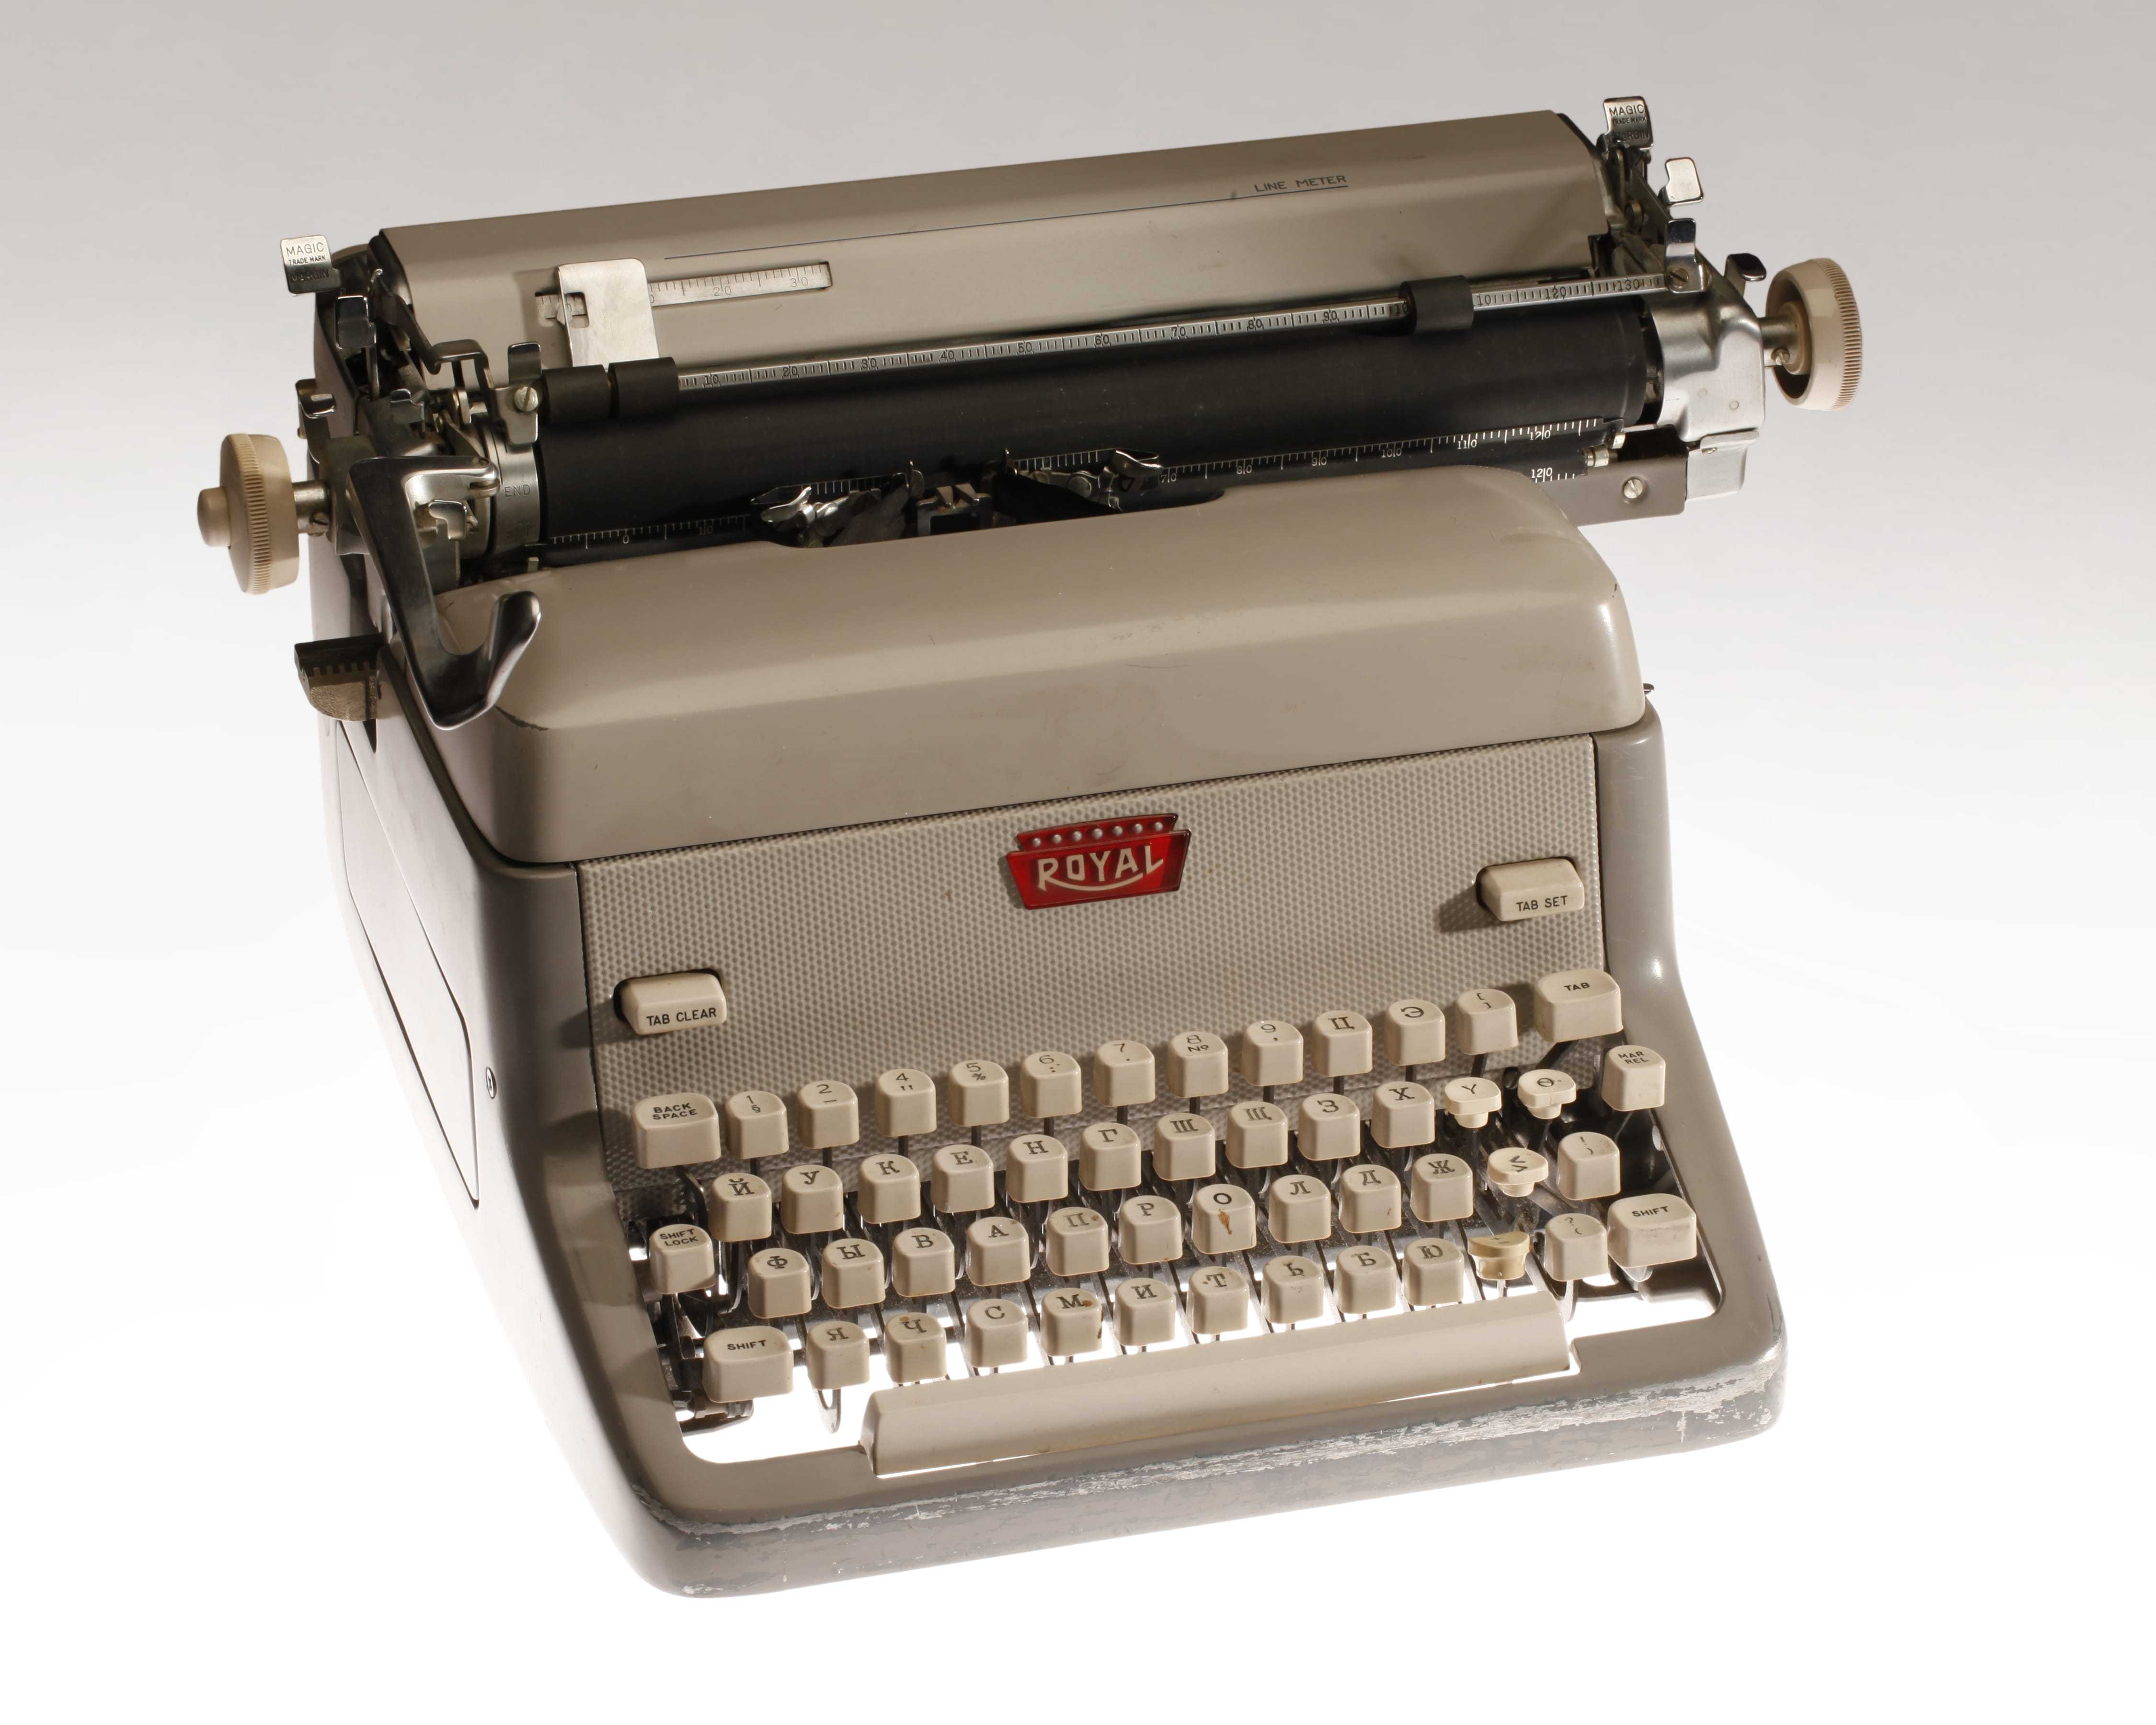 A light tan Royal brand typewriter used by the Foreign Broadcast Information Service